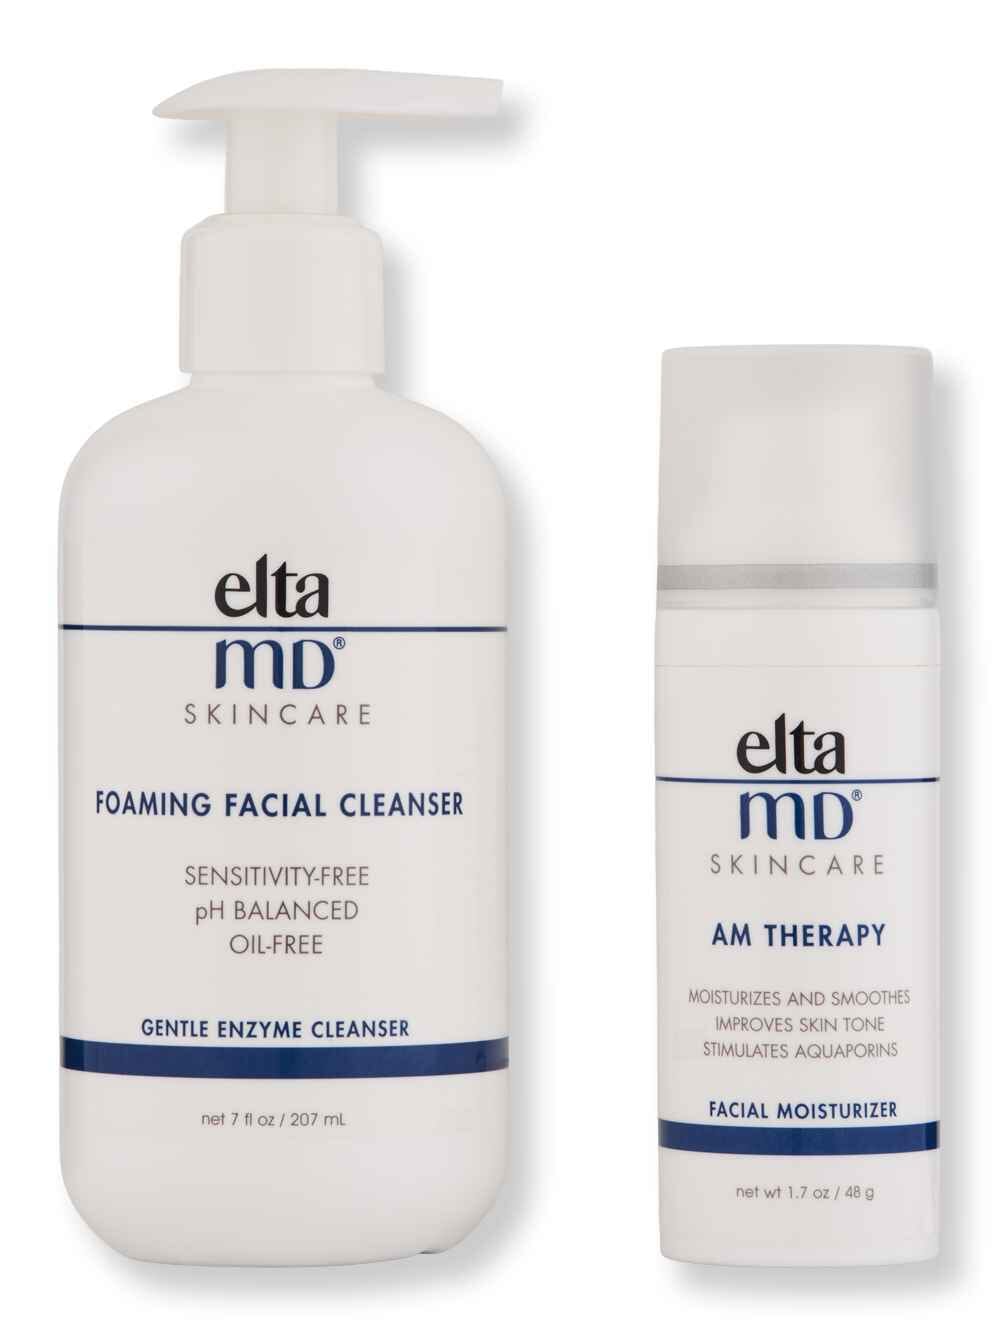 EltaMD EltaMD AM Therapy Facial Moisturizer 1.7 oz & Foaming Facial Cleanser 7 oz Skin Care Kits 